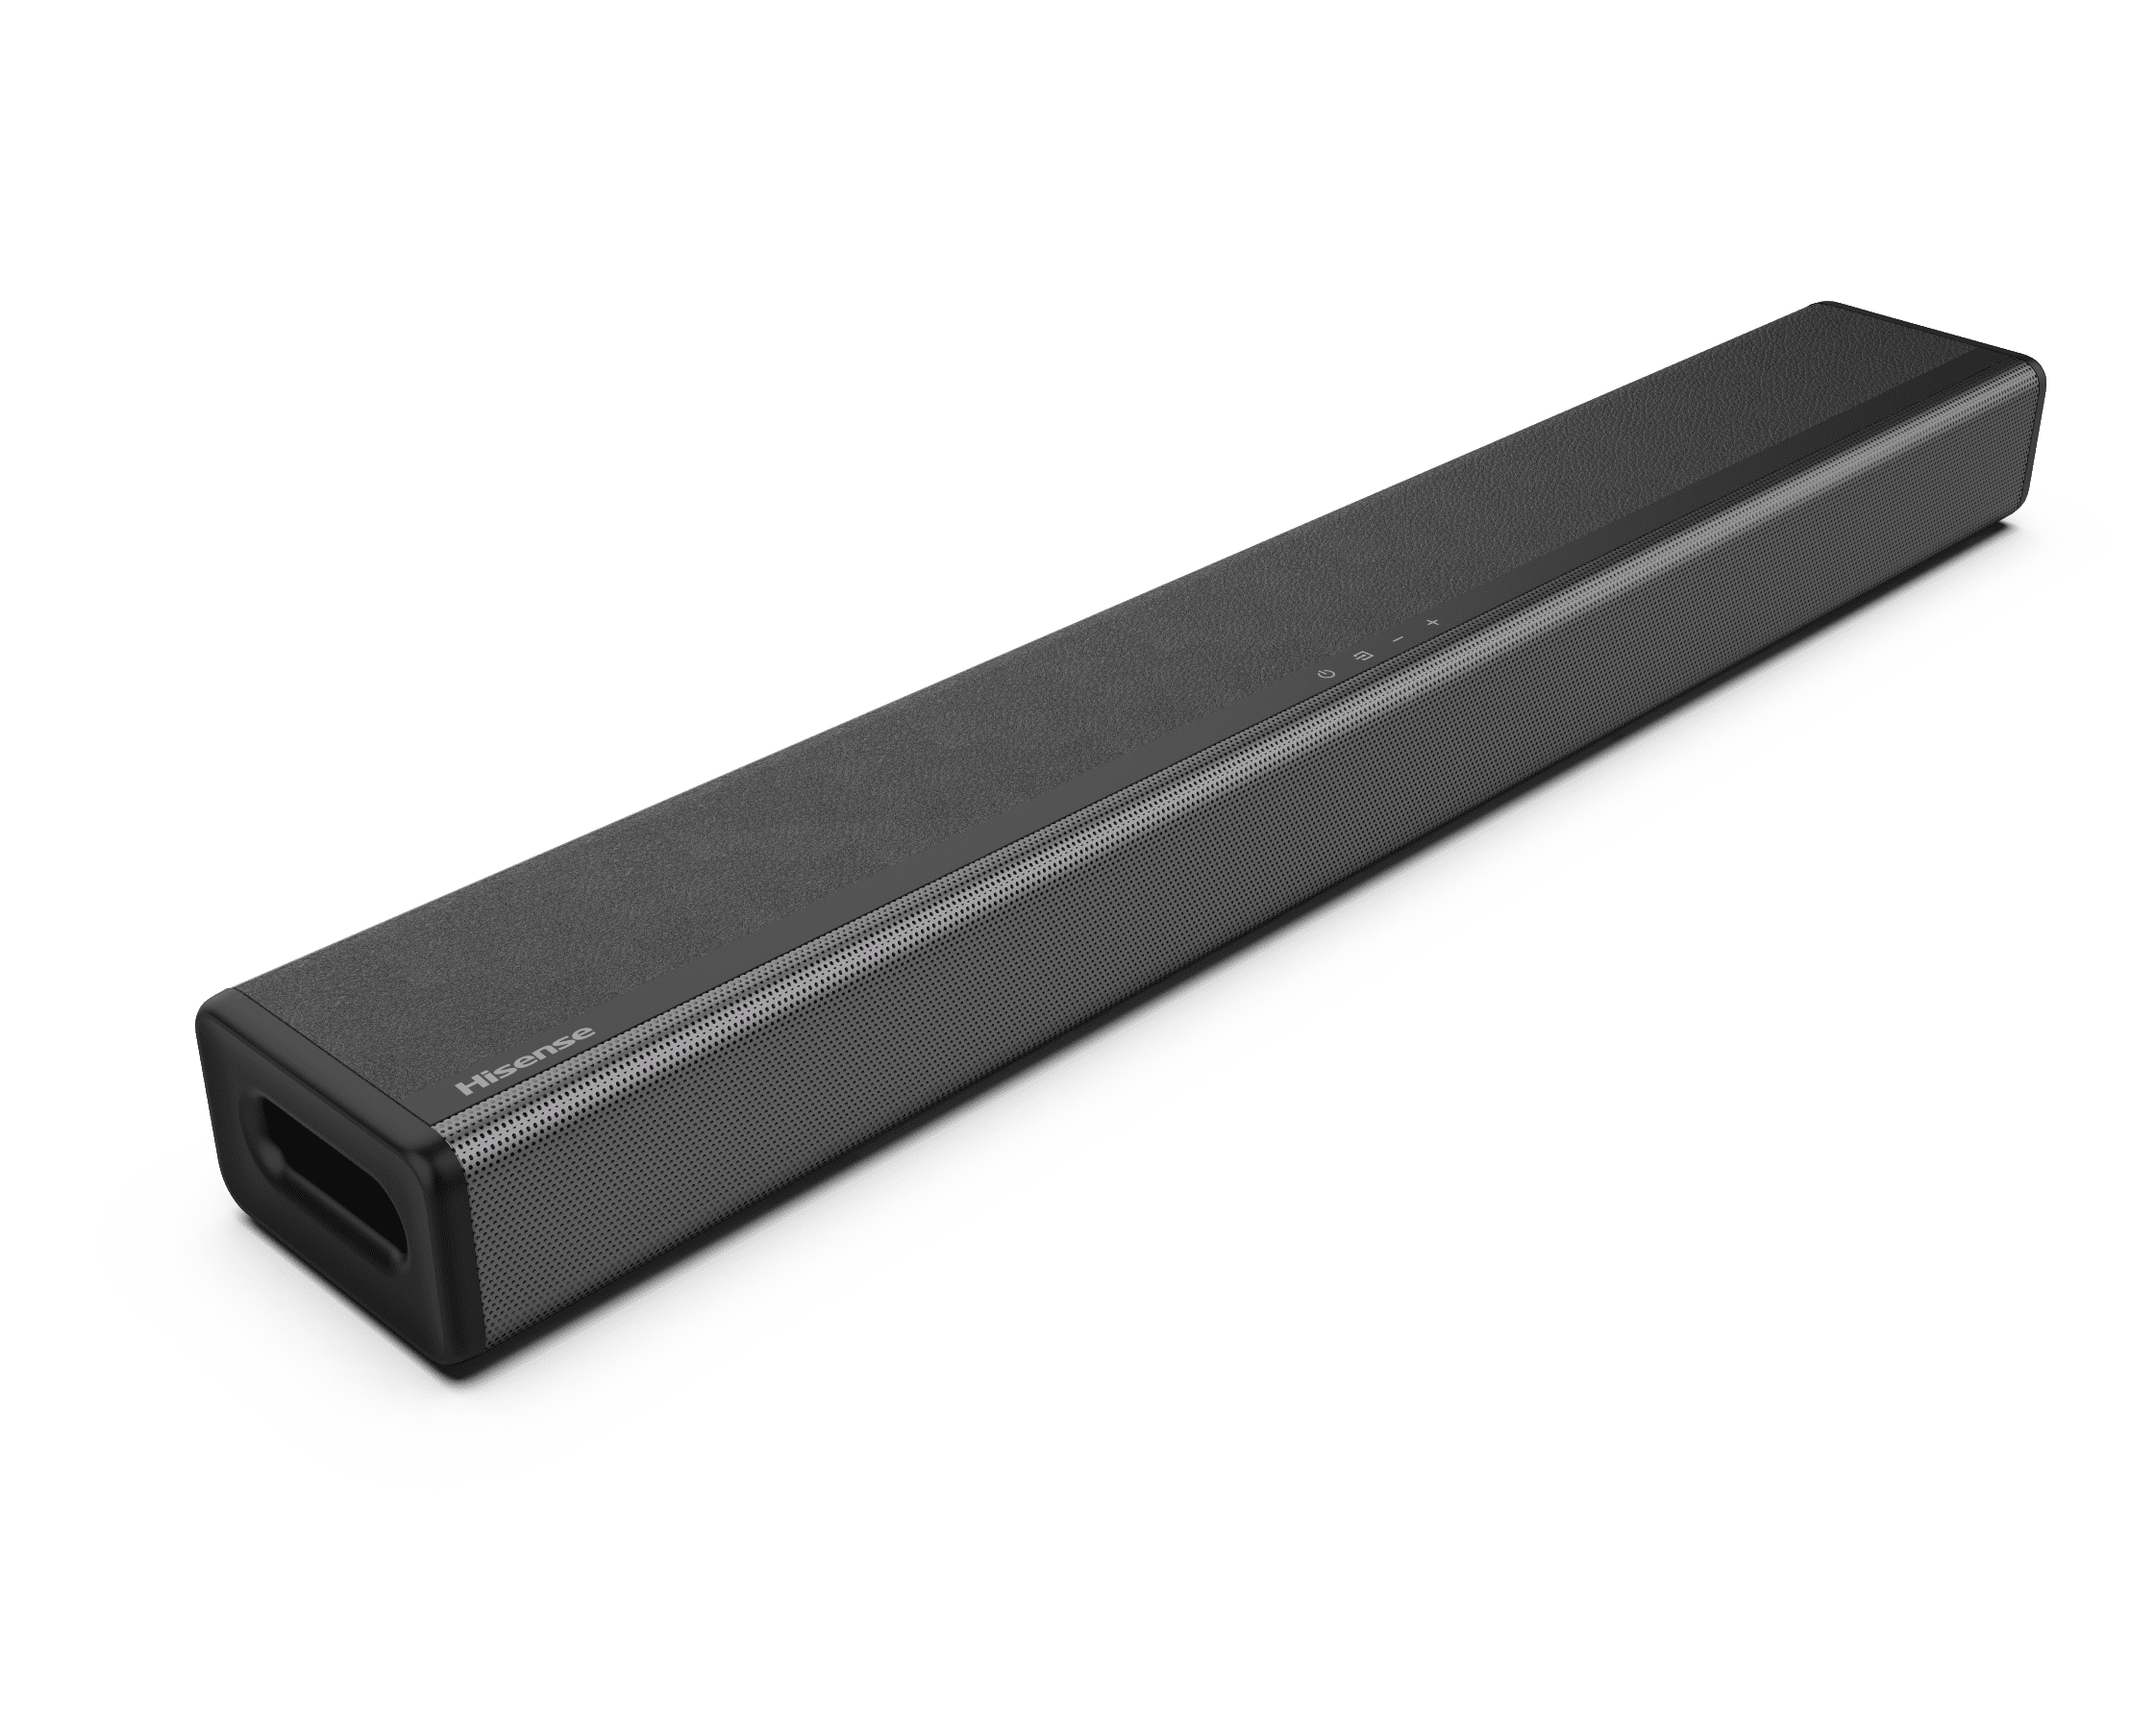 Hisense HS214 2.1 Channel Sound Bar with Built-in Subwoofer